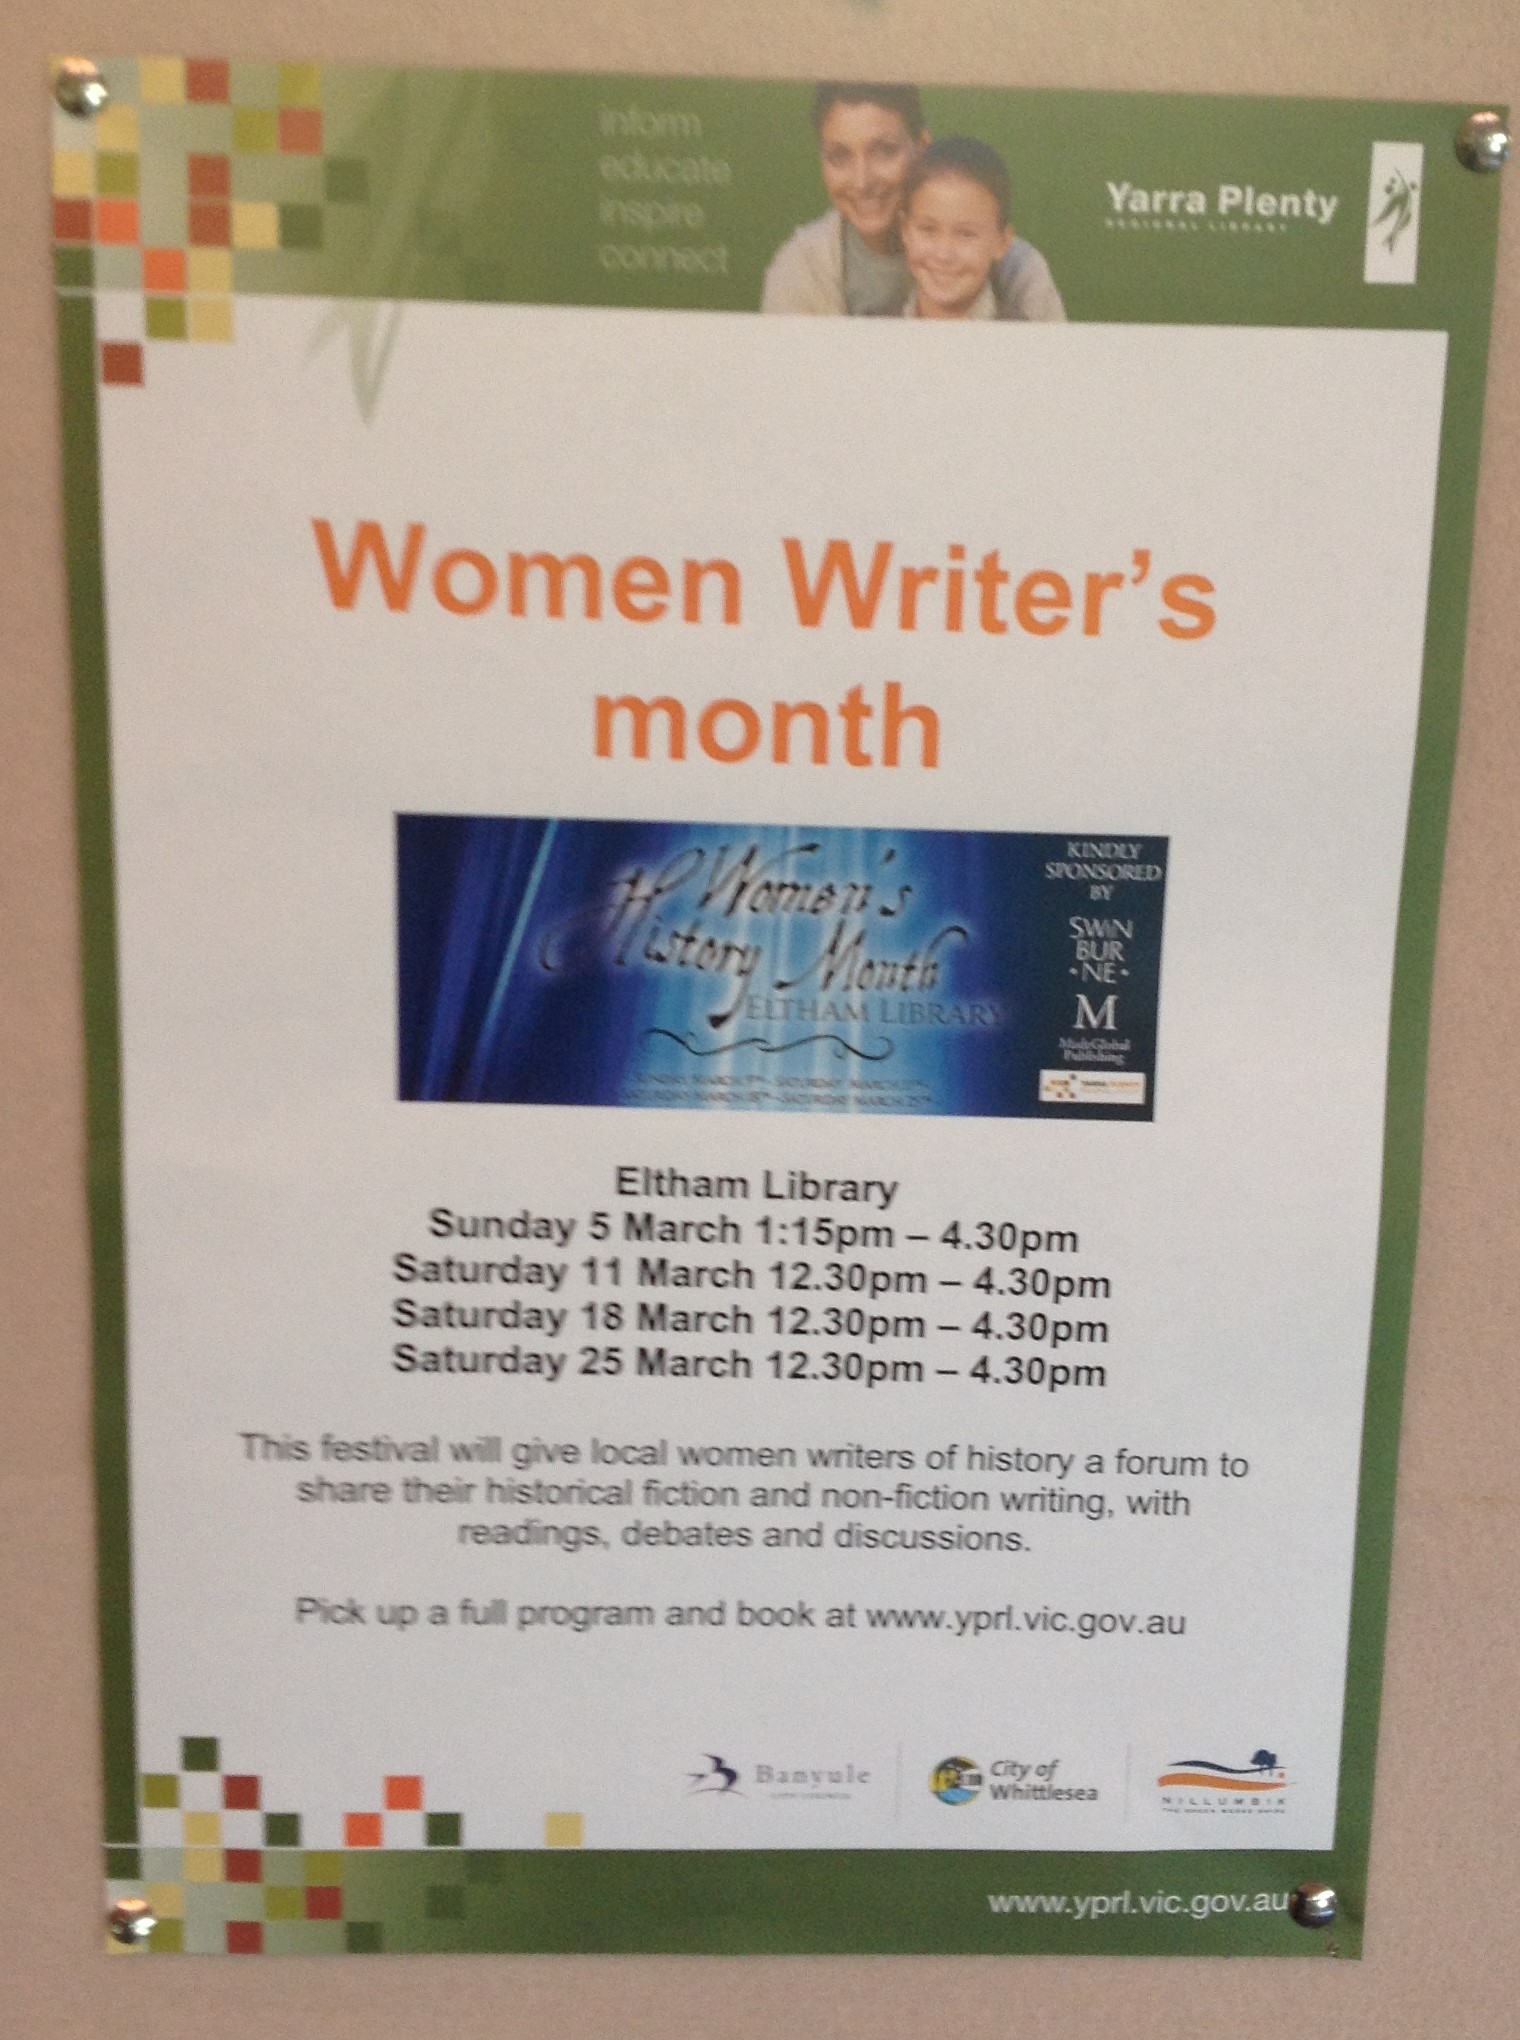 Sign in the foyer of the Eltham Library